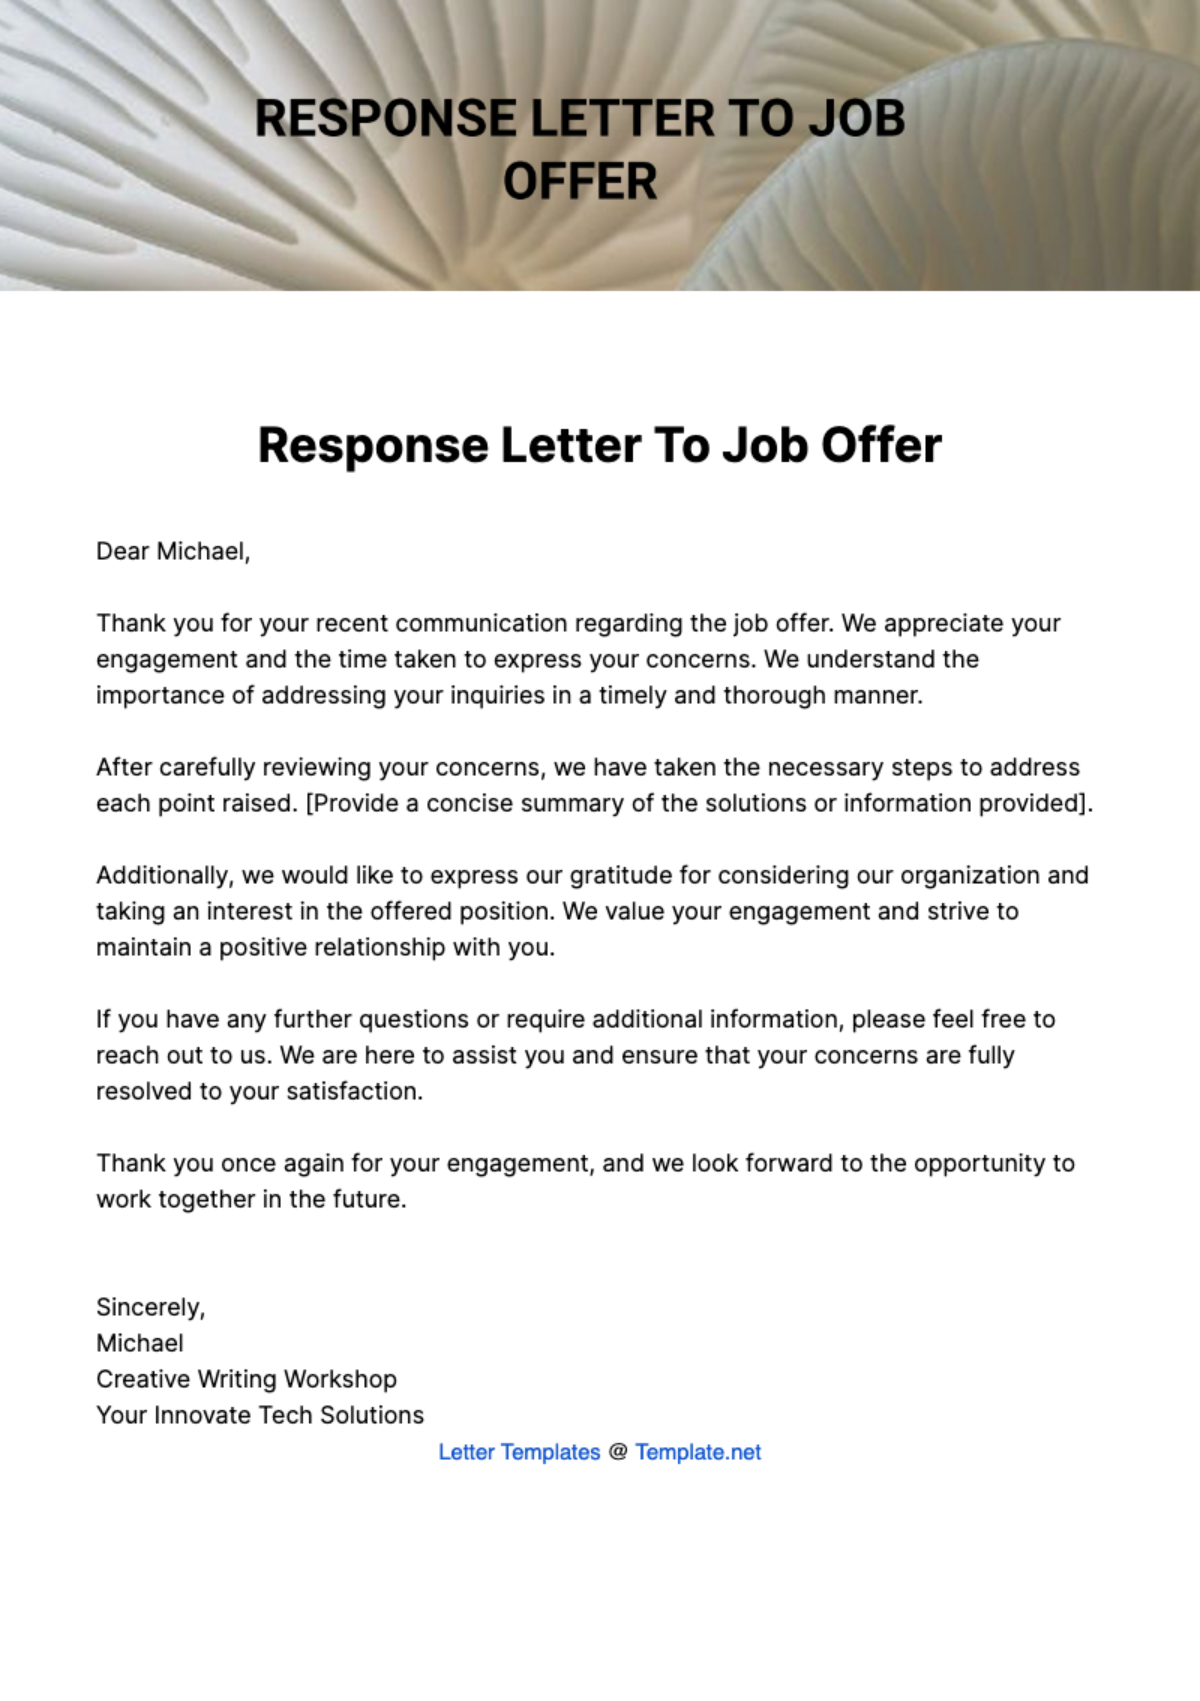 Free Response Letter To Job Offer Template